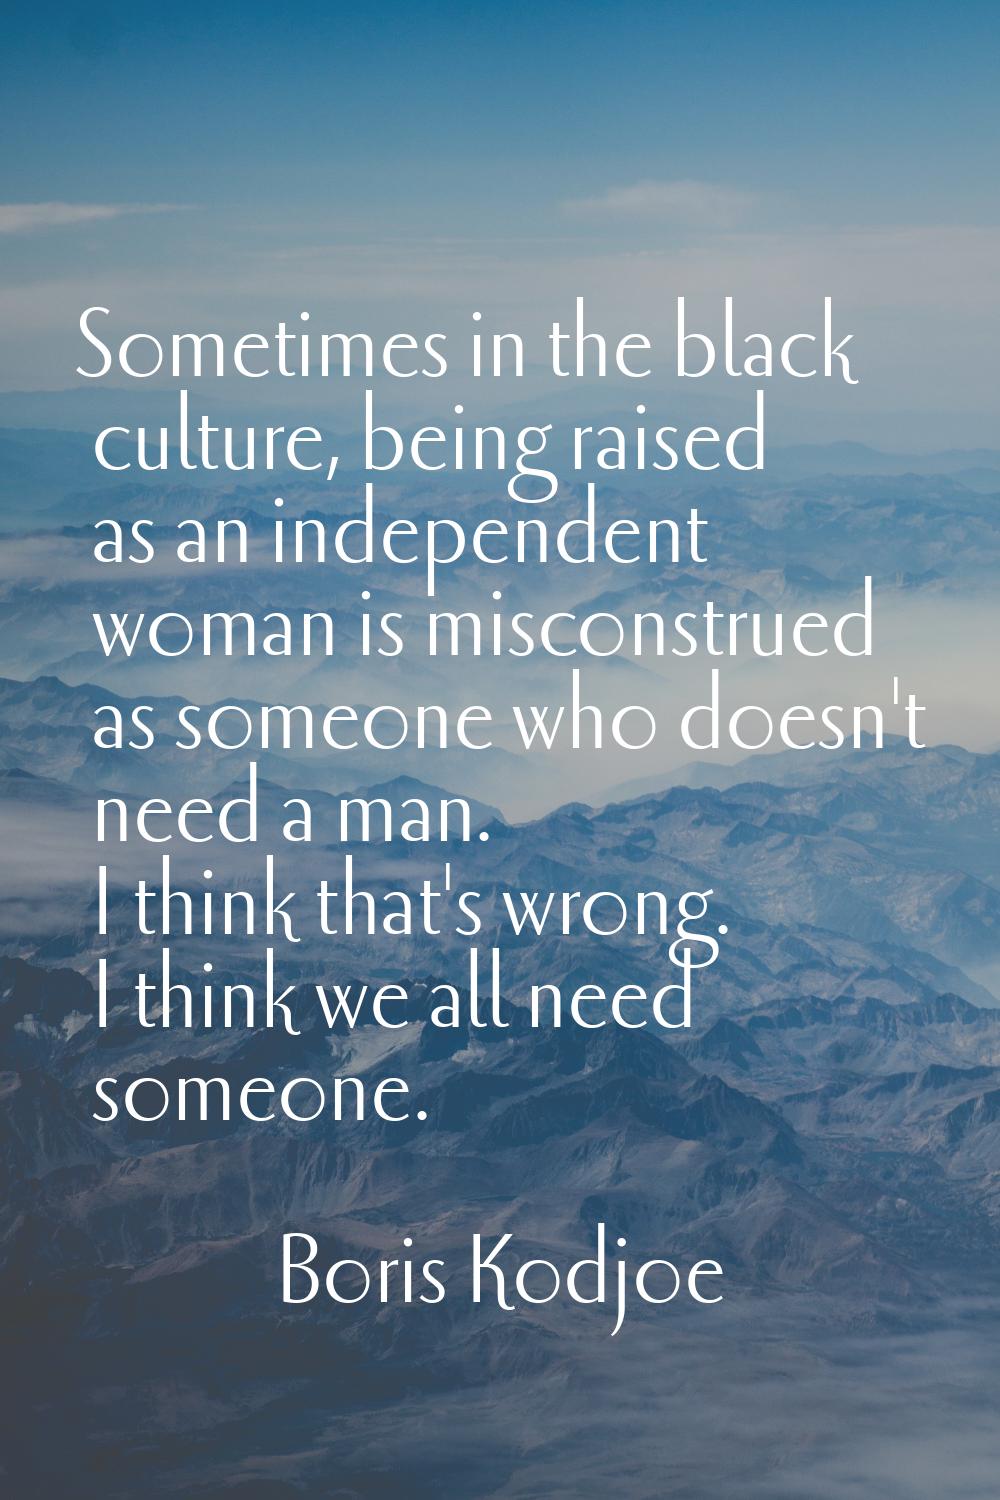 Sometimes in the black culture, being raised as an independent woman is misconstrued as someone who